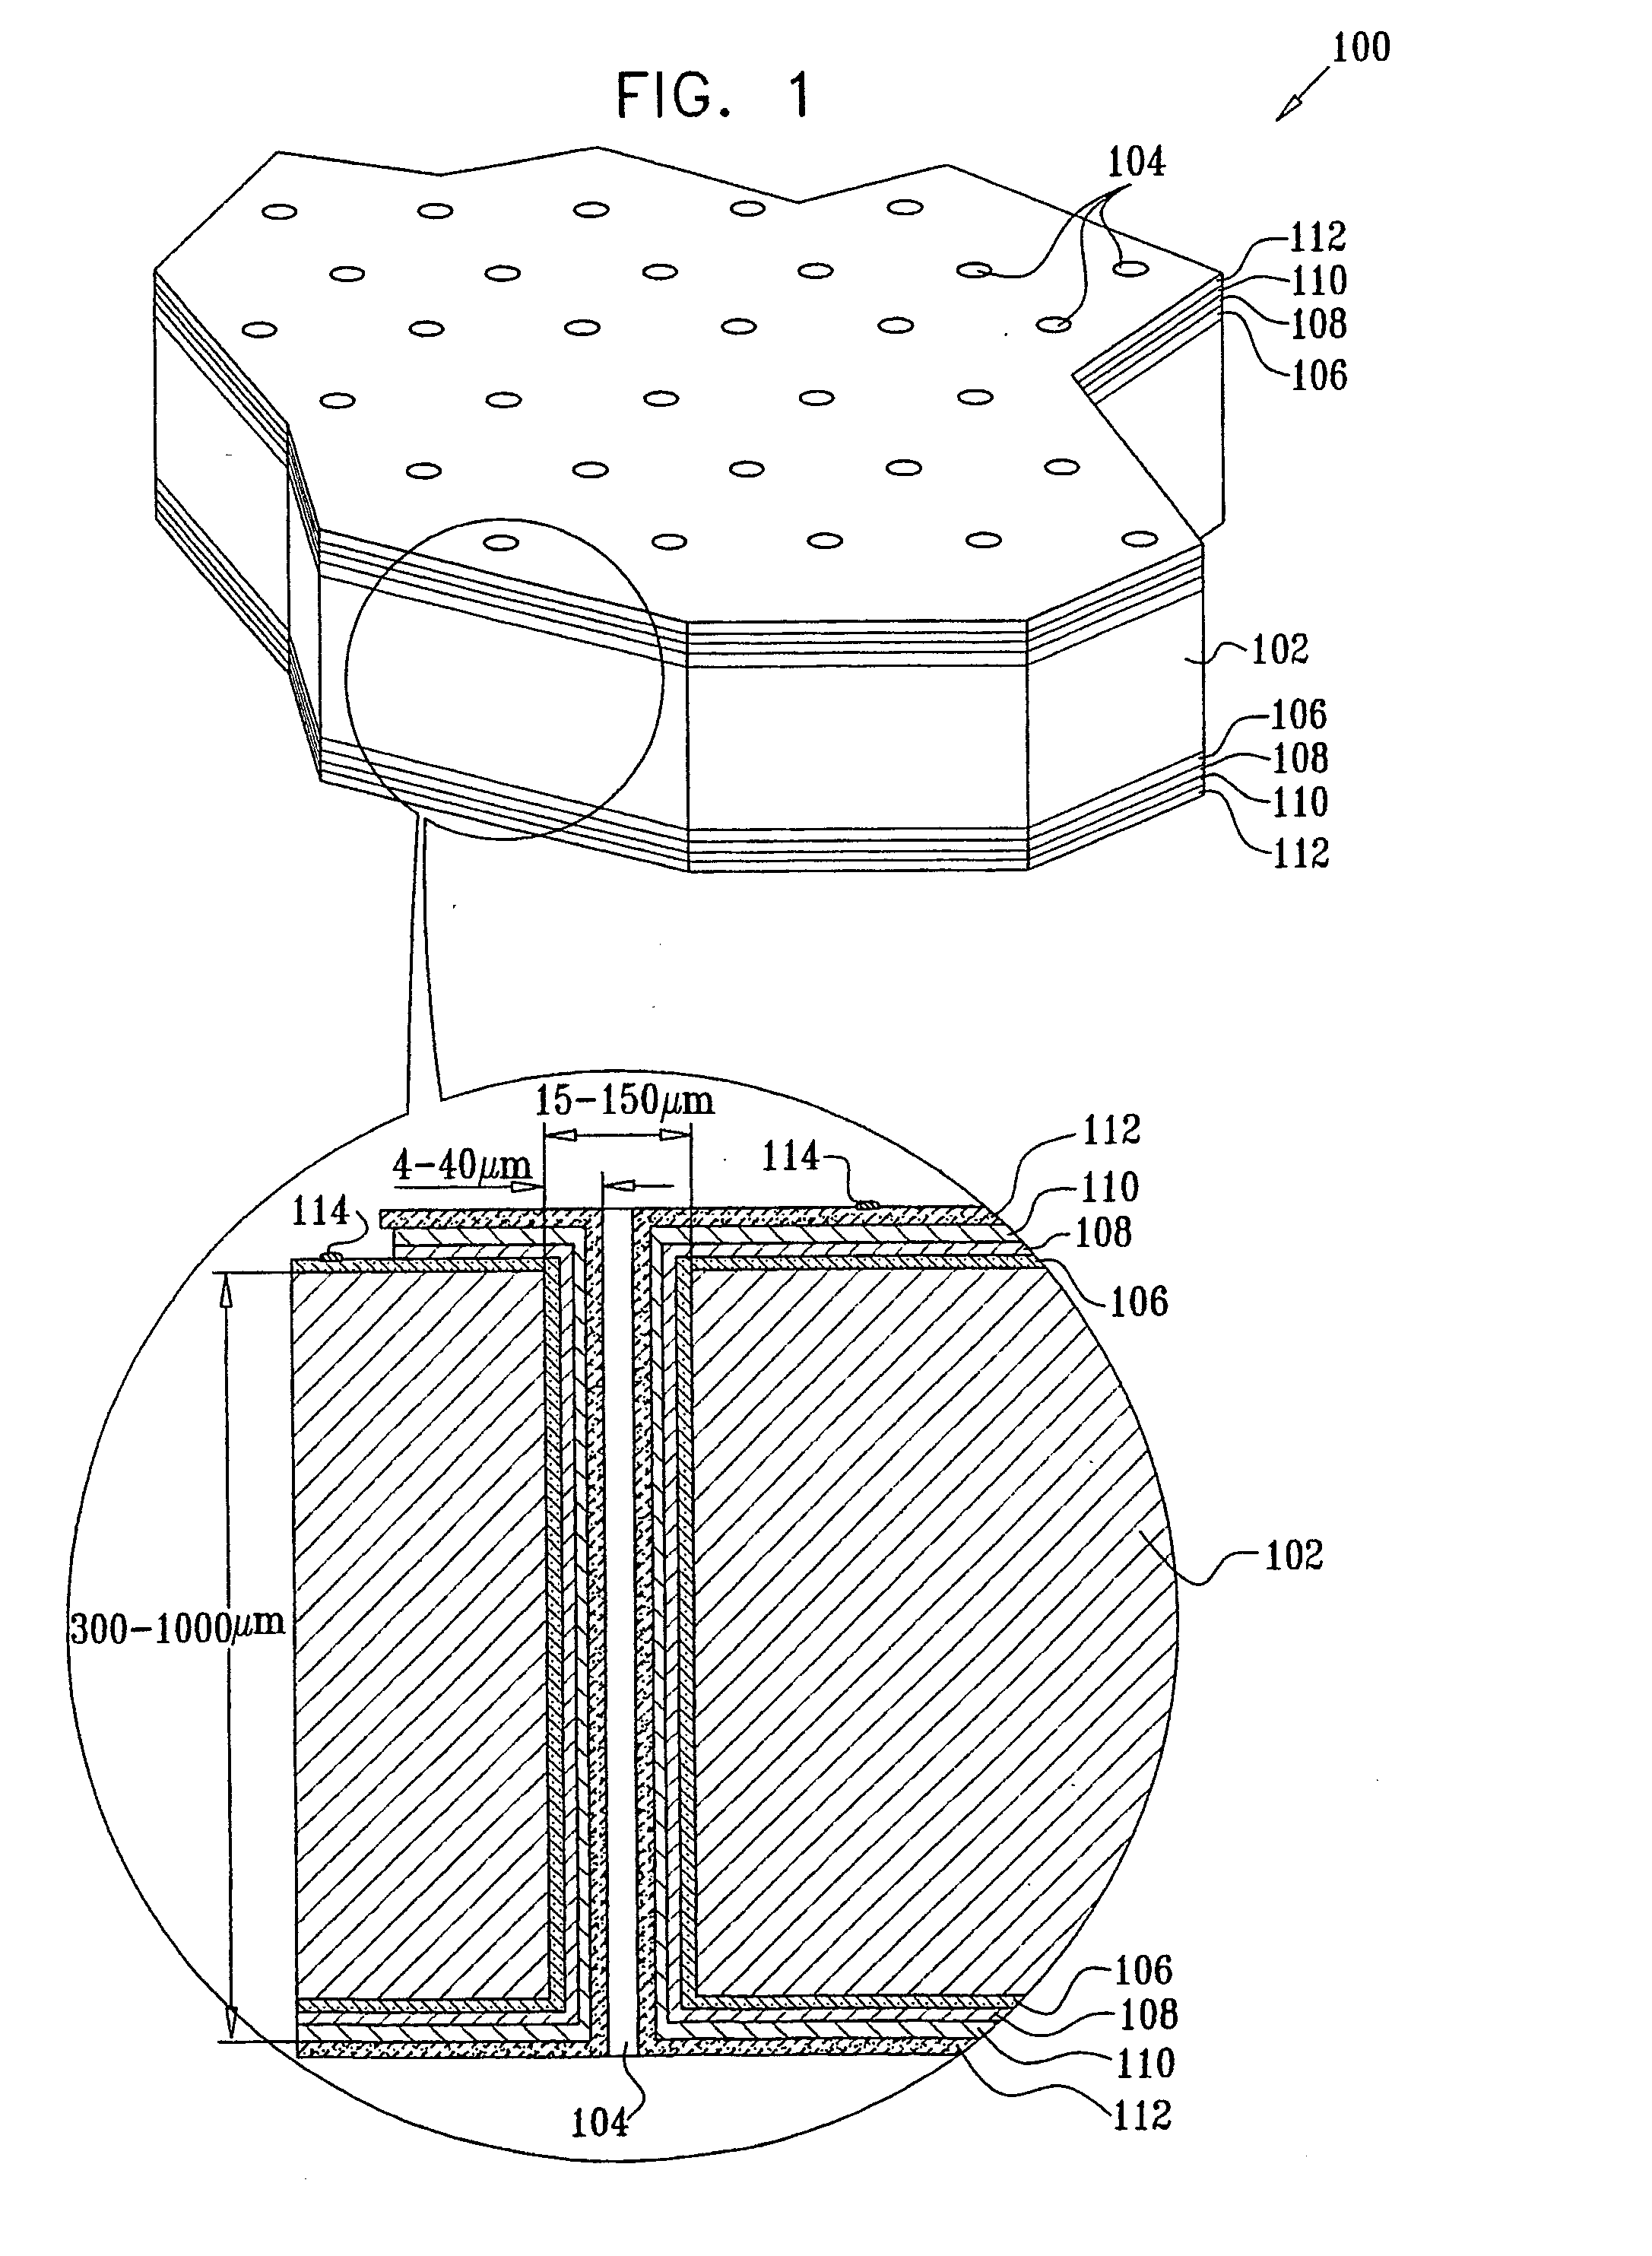 Thin-film cathode for 3-dimensional microbattery and method for preparing such cathode